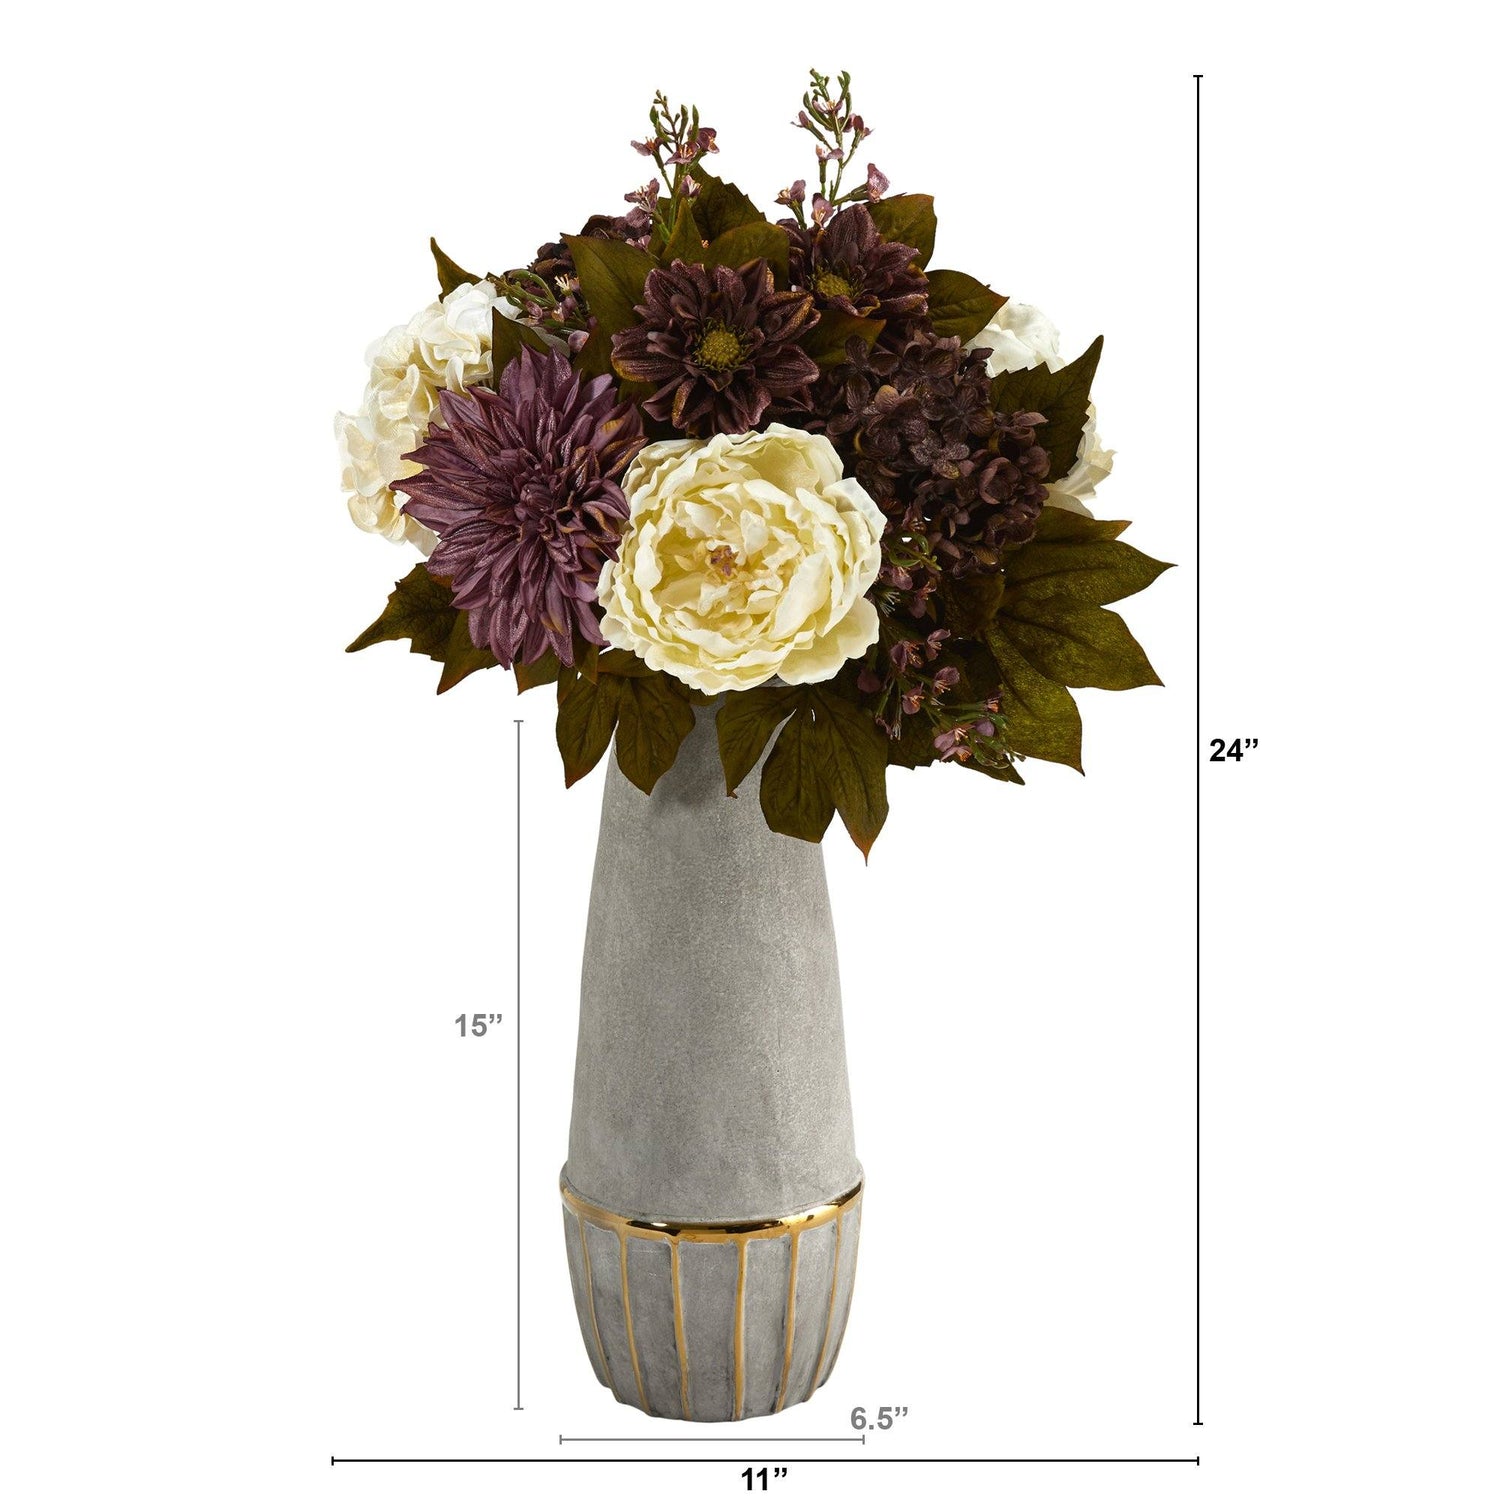 24” Peony, Hydrangea and Dahlia Artificial Arrangement in Stoneware Vase with Gold Trimming